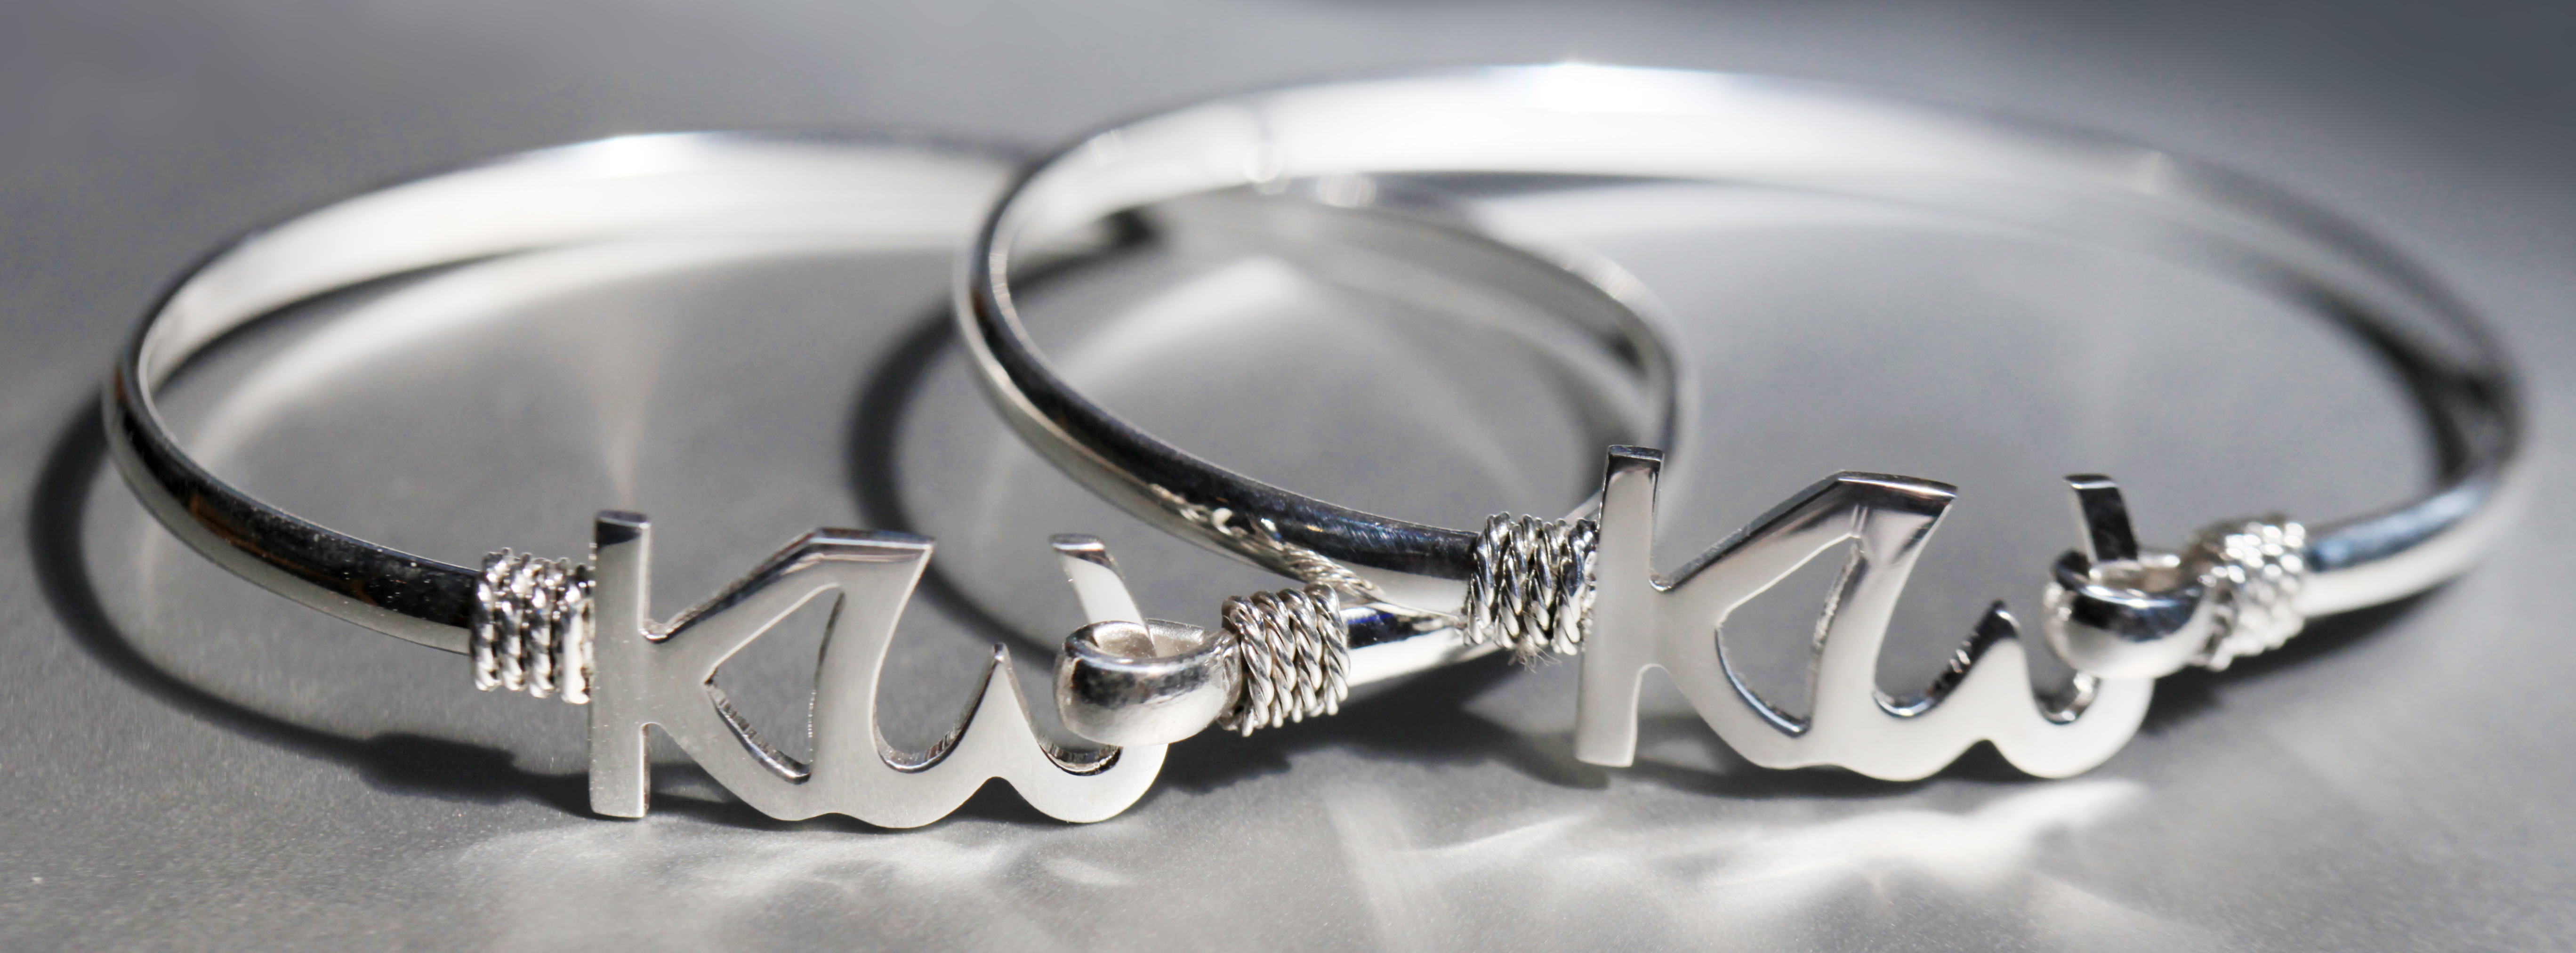 Silver Plated Key West Bracelets | Local Color